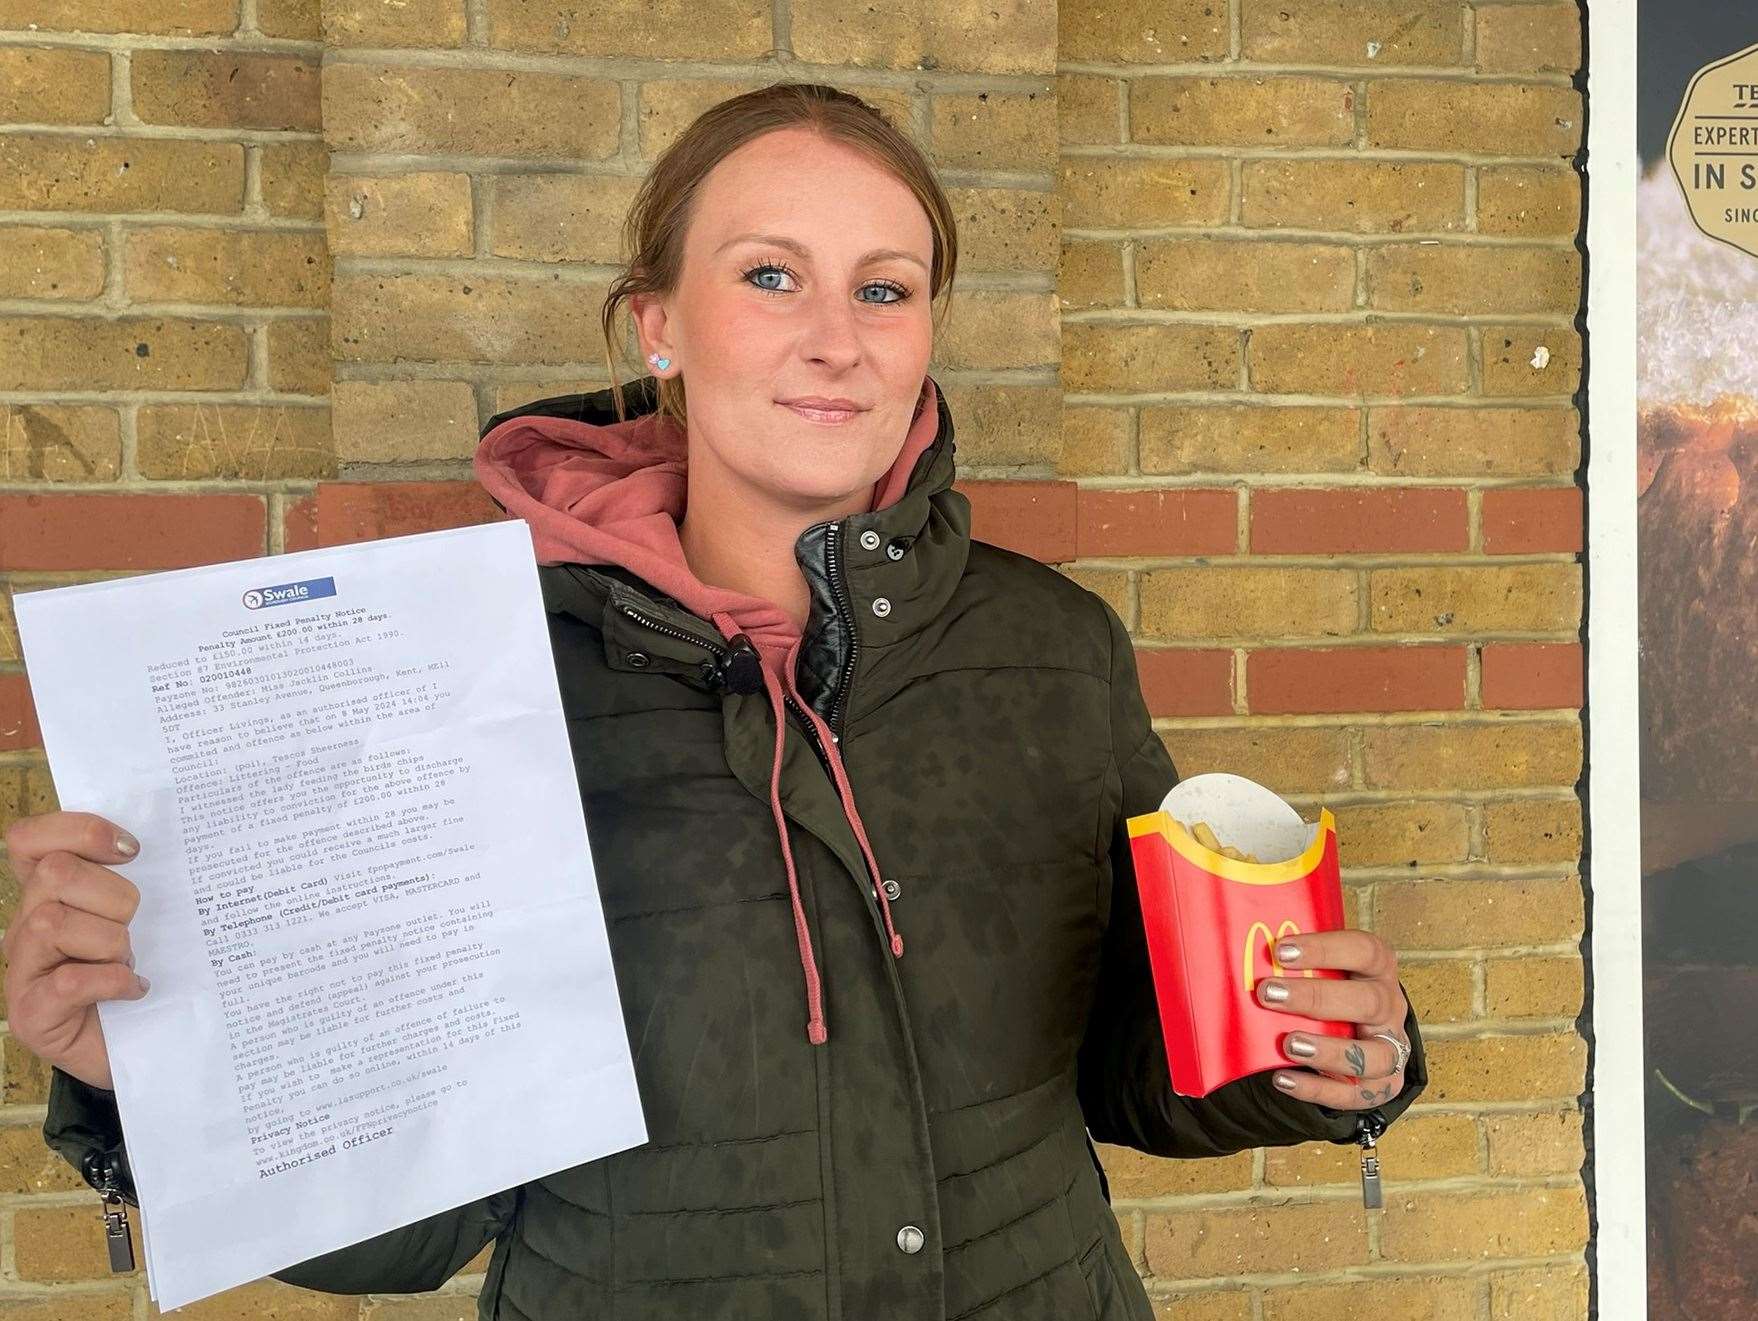 Jacqueline Clarke, from Queenborough, was fined £200 after dropping chips outside Tesco car park in Sheerness. Picture: Joe Crossley